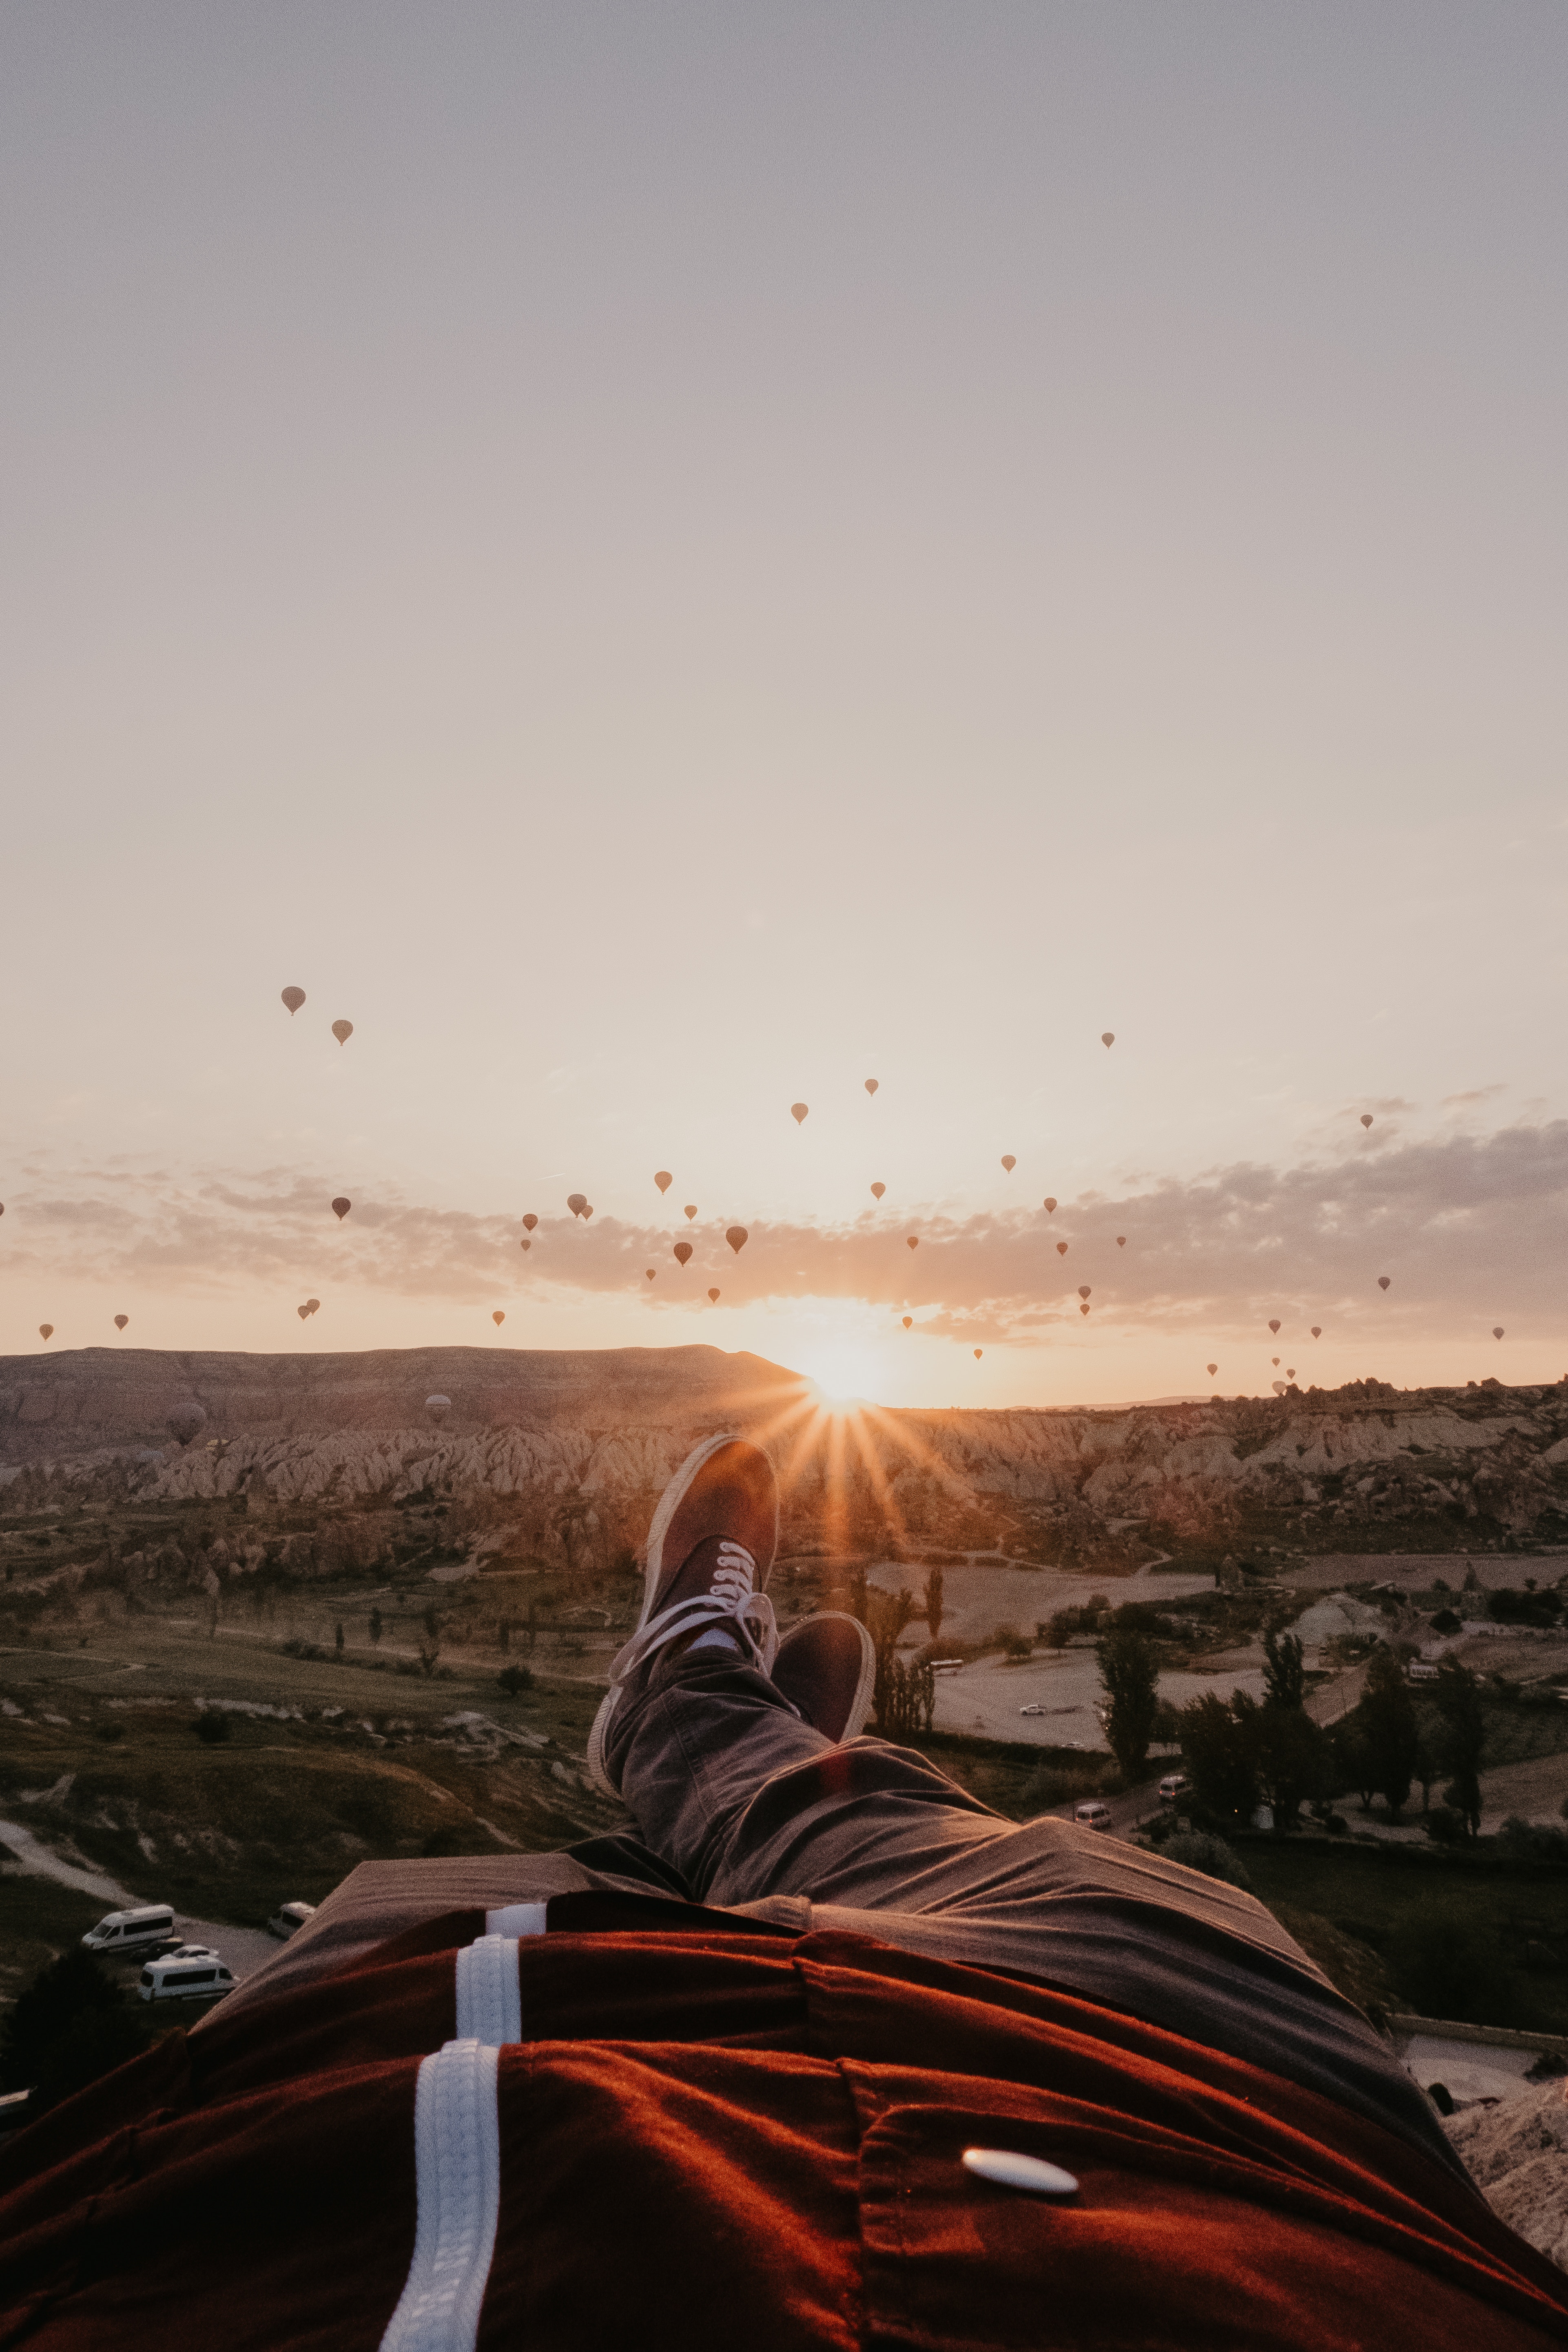 Free Images sunset, rest, mountains, balloons Legs